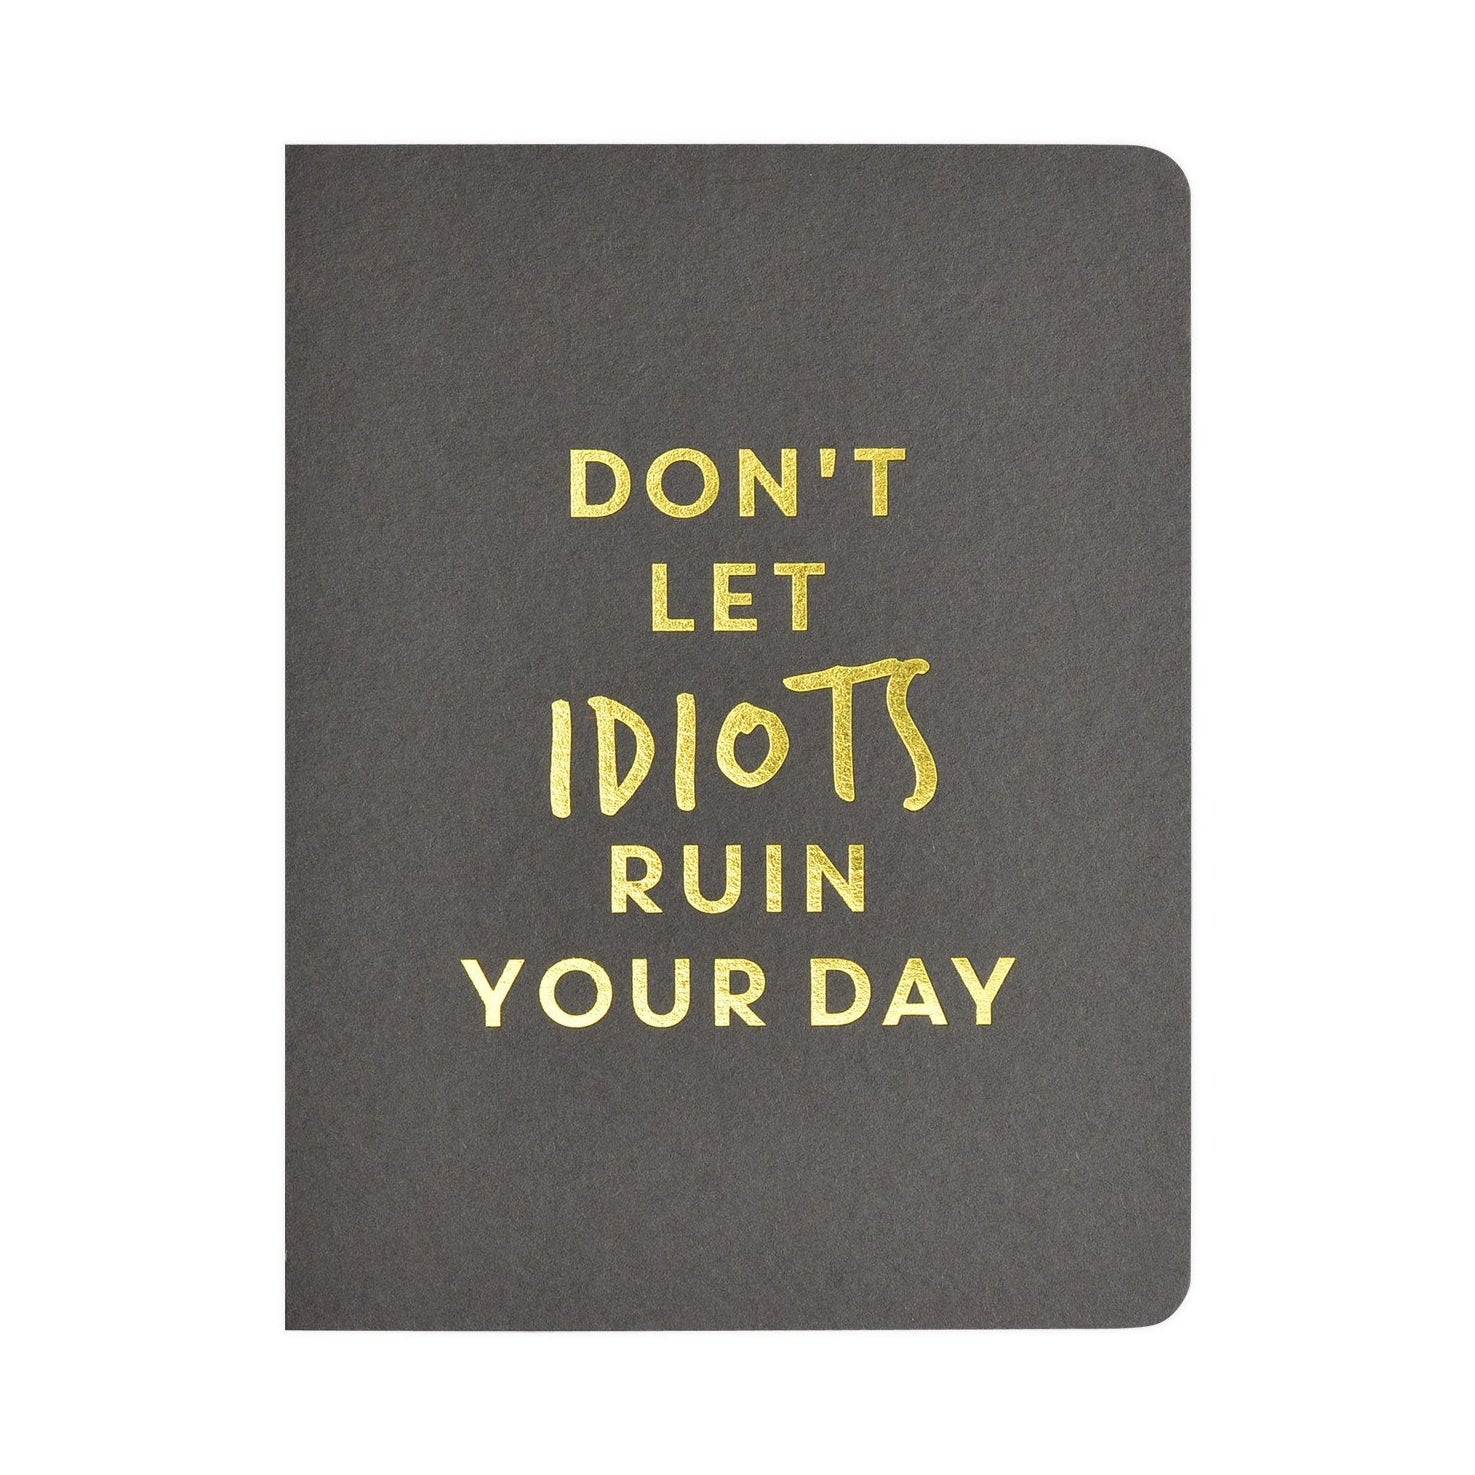 Smitten on Paper Idiots Greeting Card 